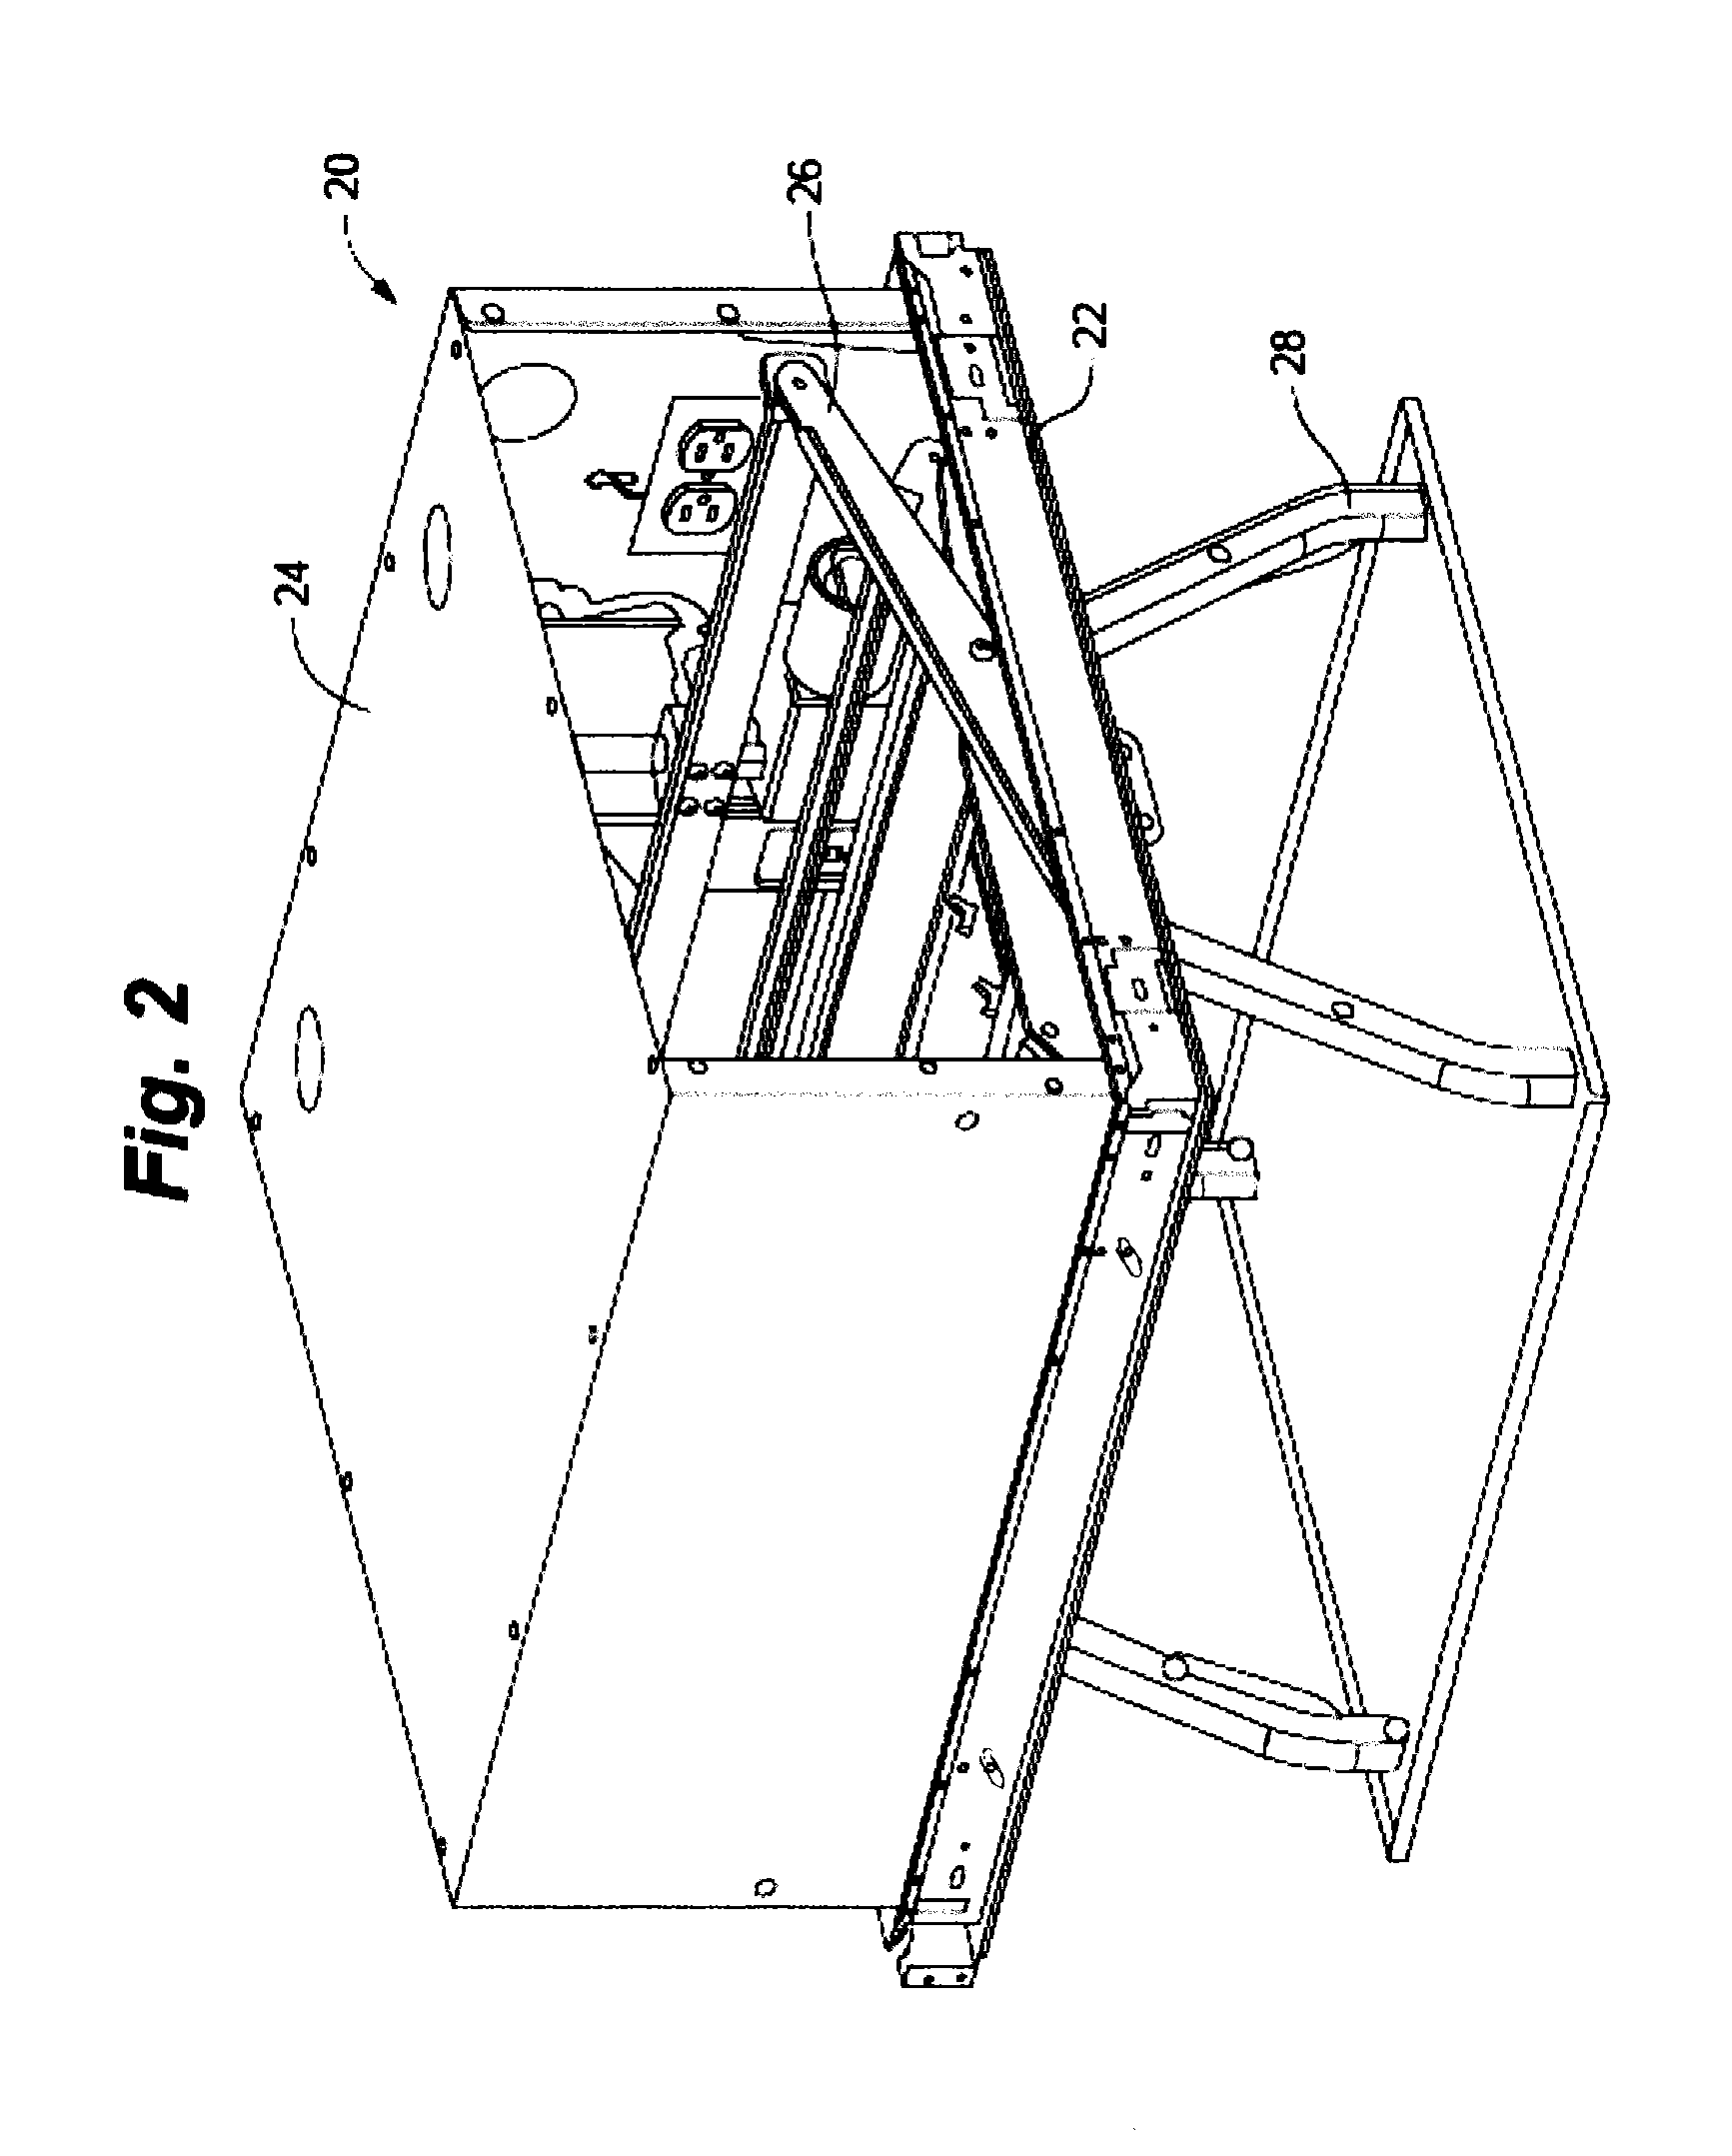 Projector mount and method and system for installing a device in a suspending ceiling